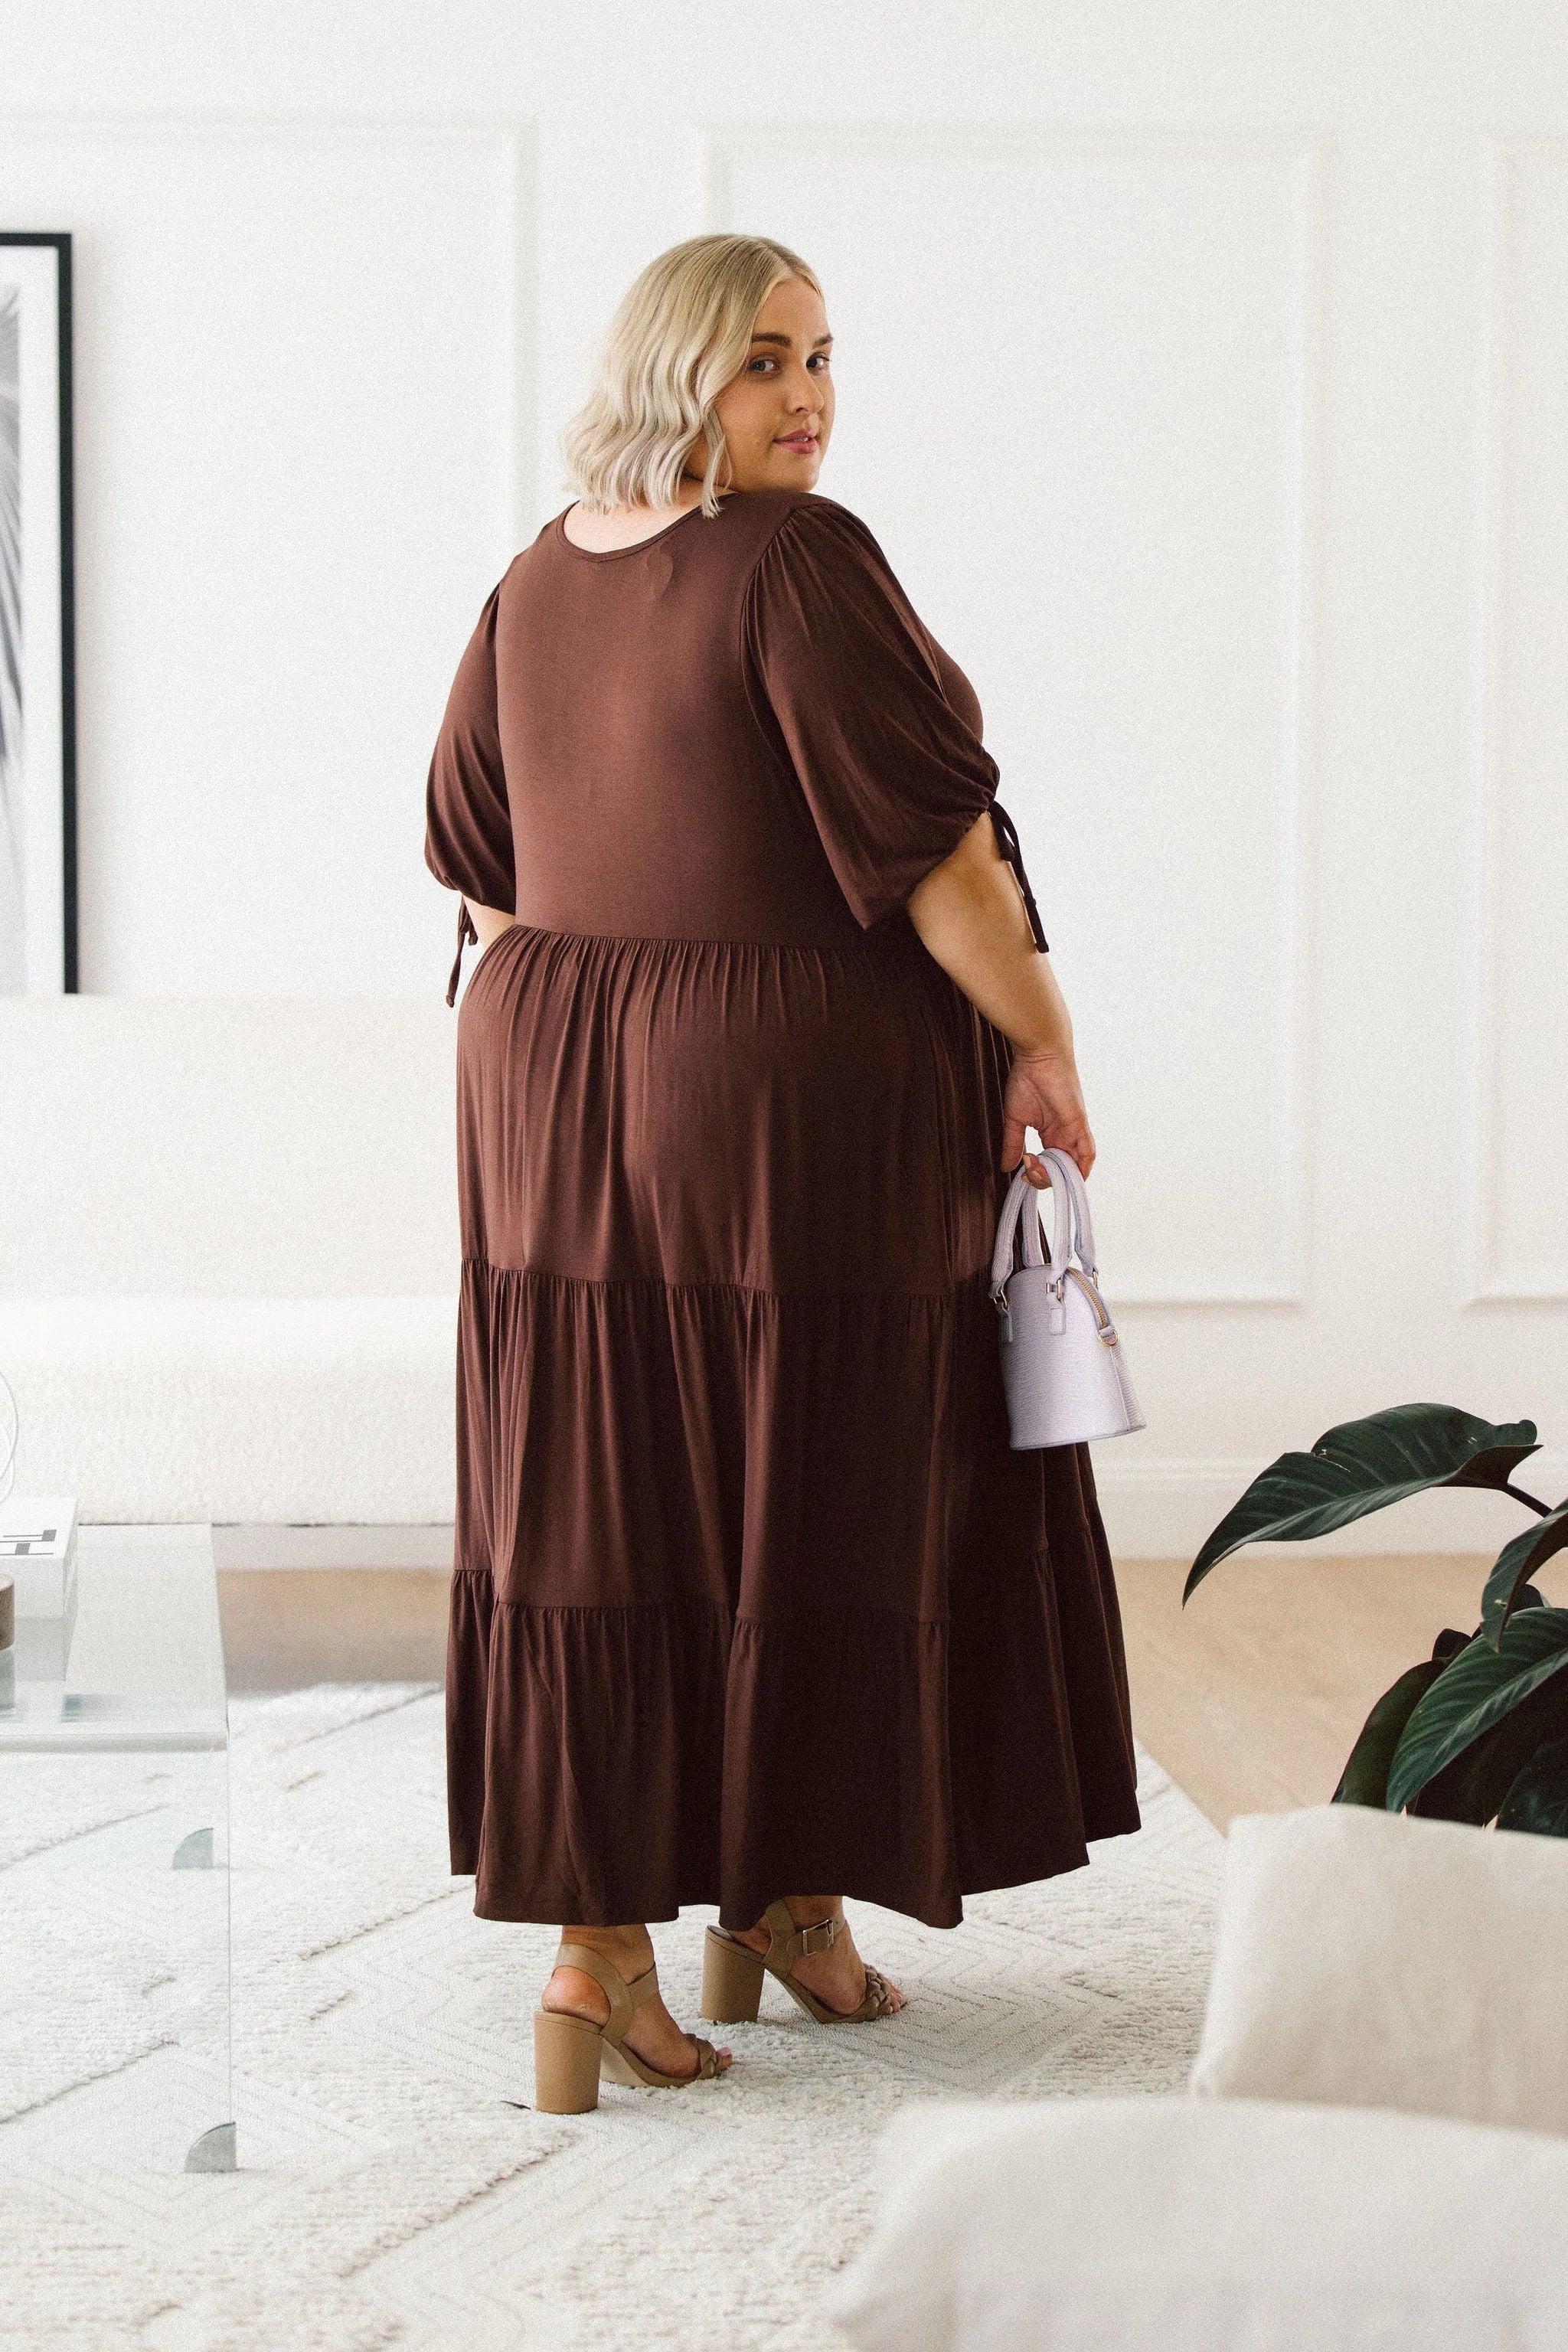 Fashionable Plus Size Chocolate Dress - Harlow Dress by Peach The Label